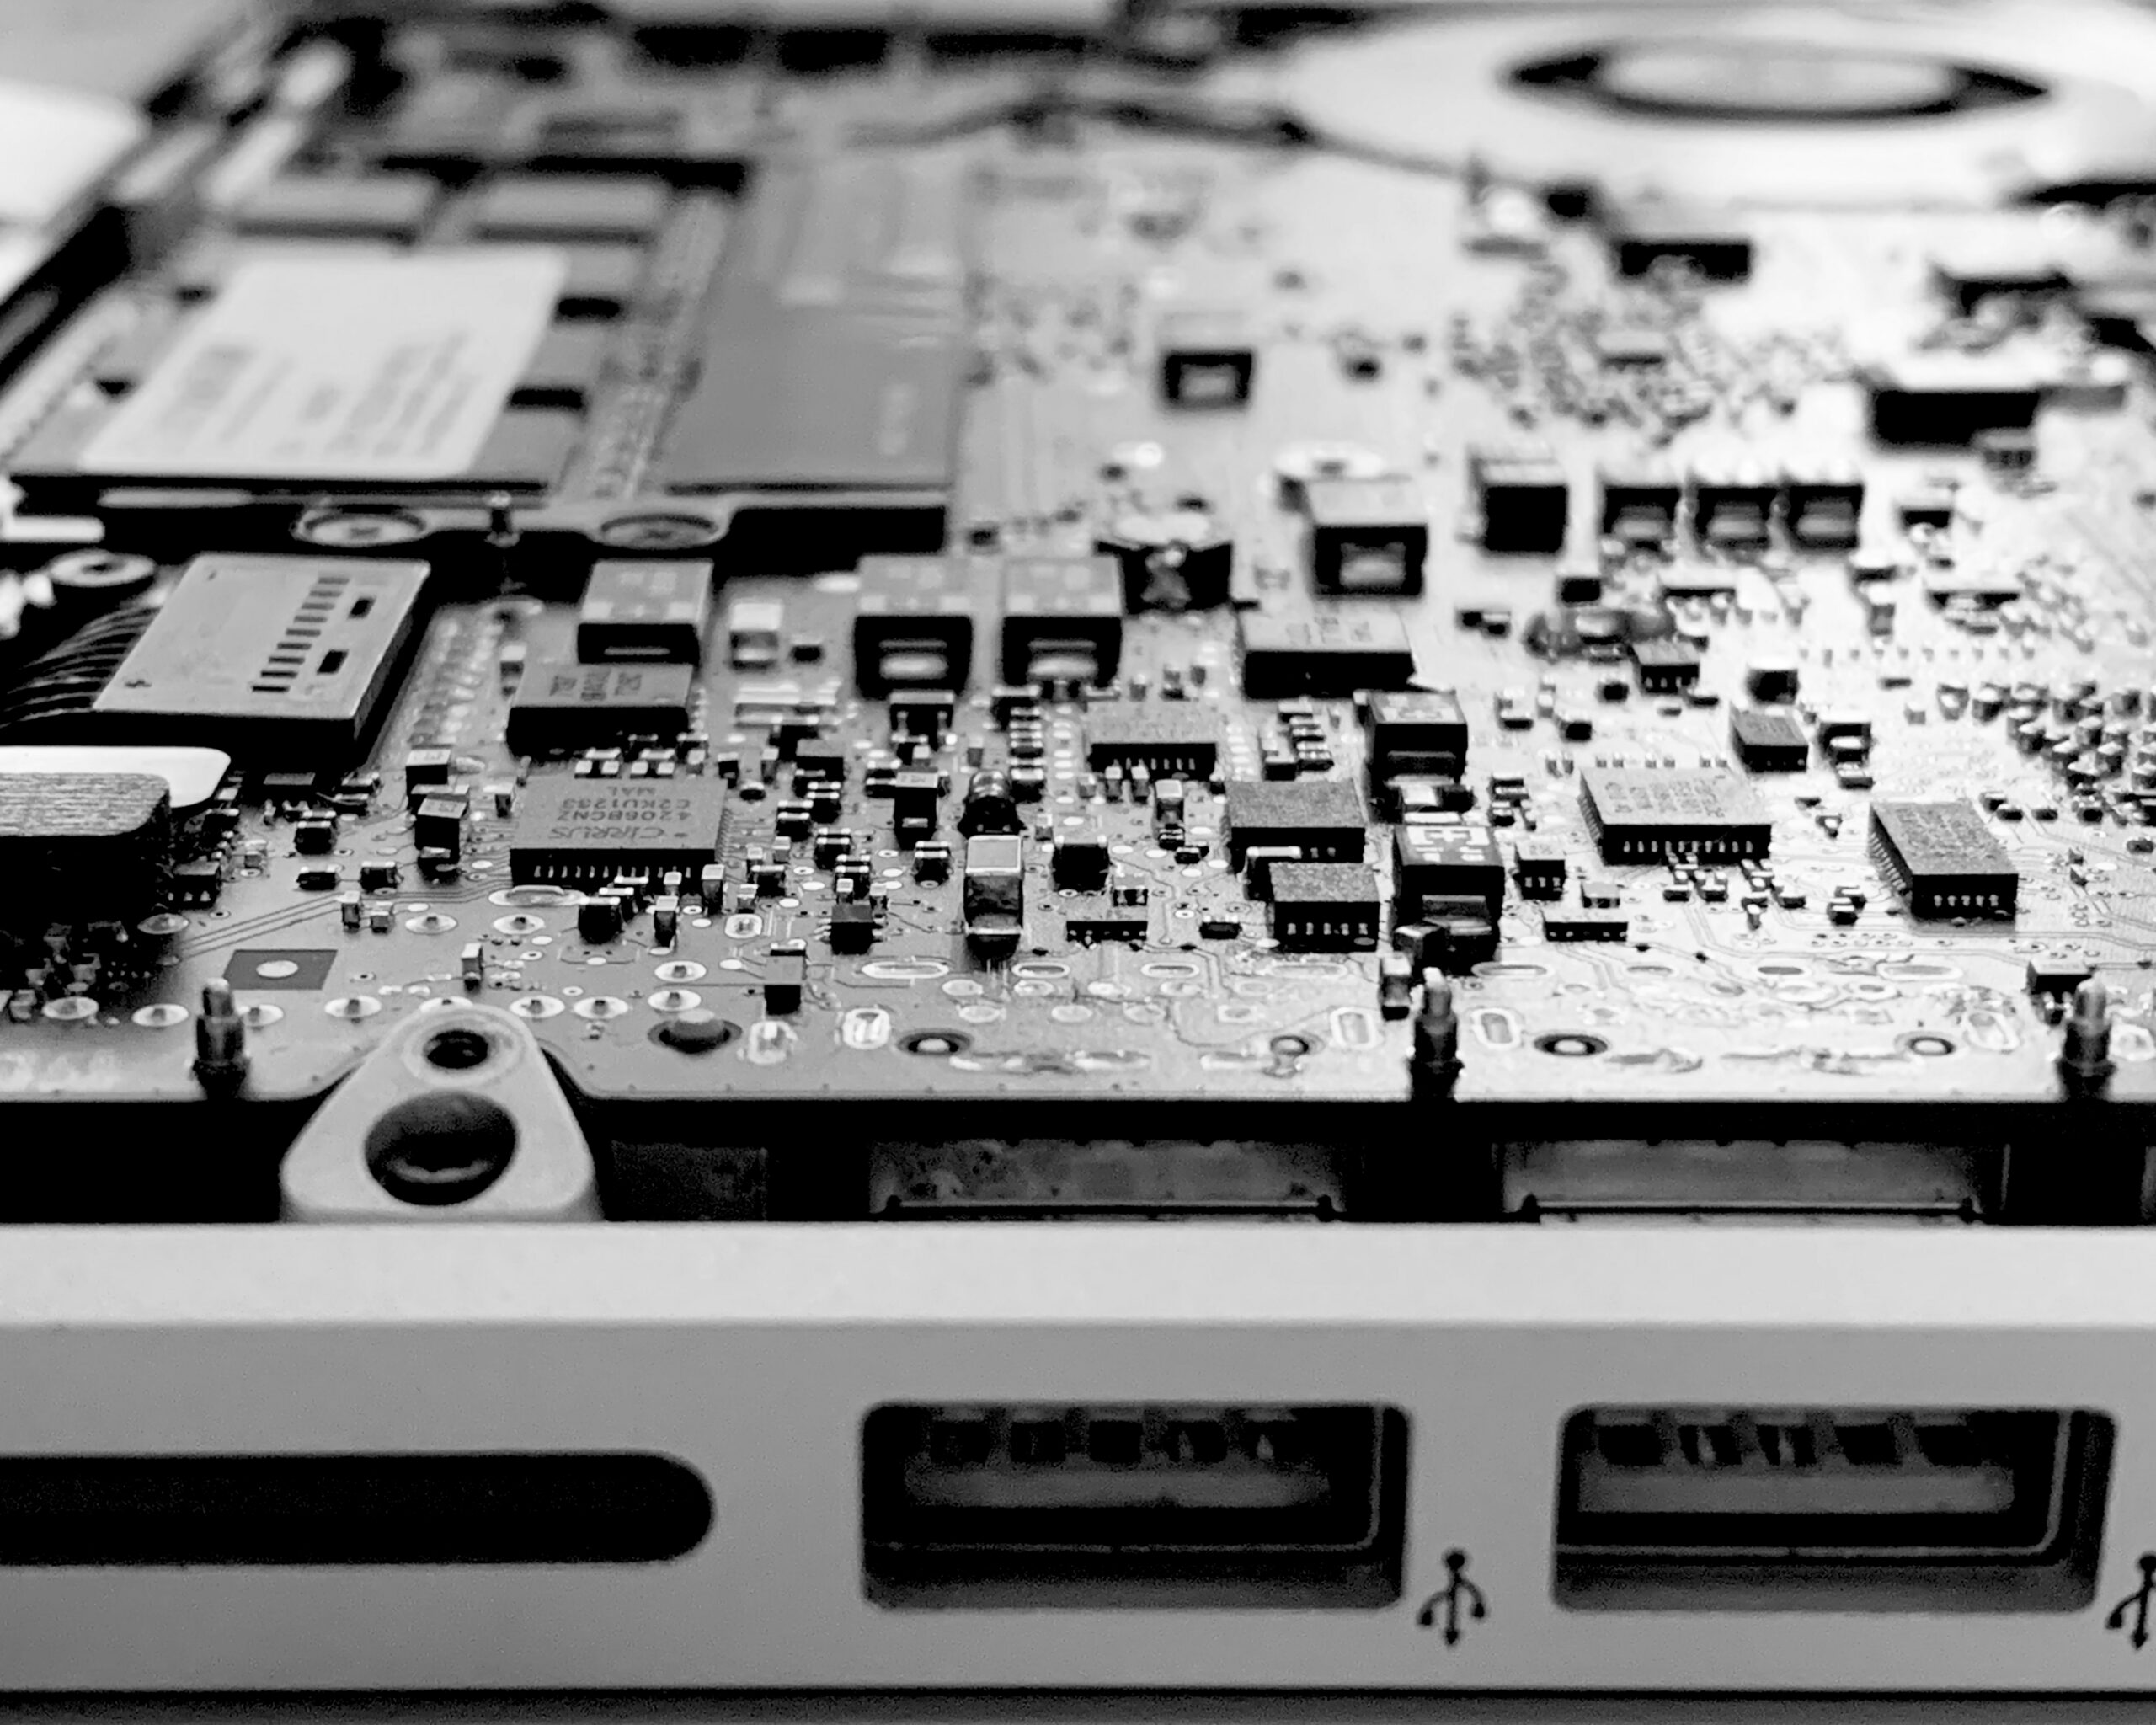 A black and white image of a laptop circuitboard |